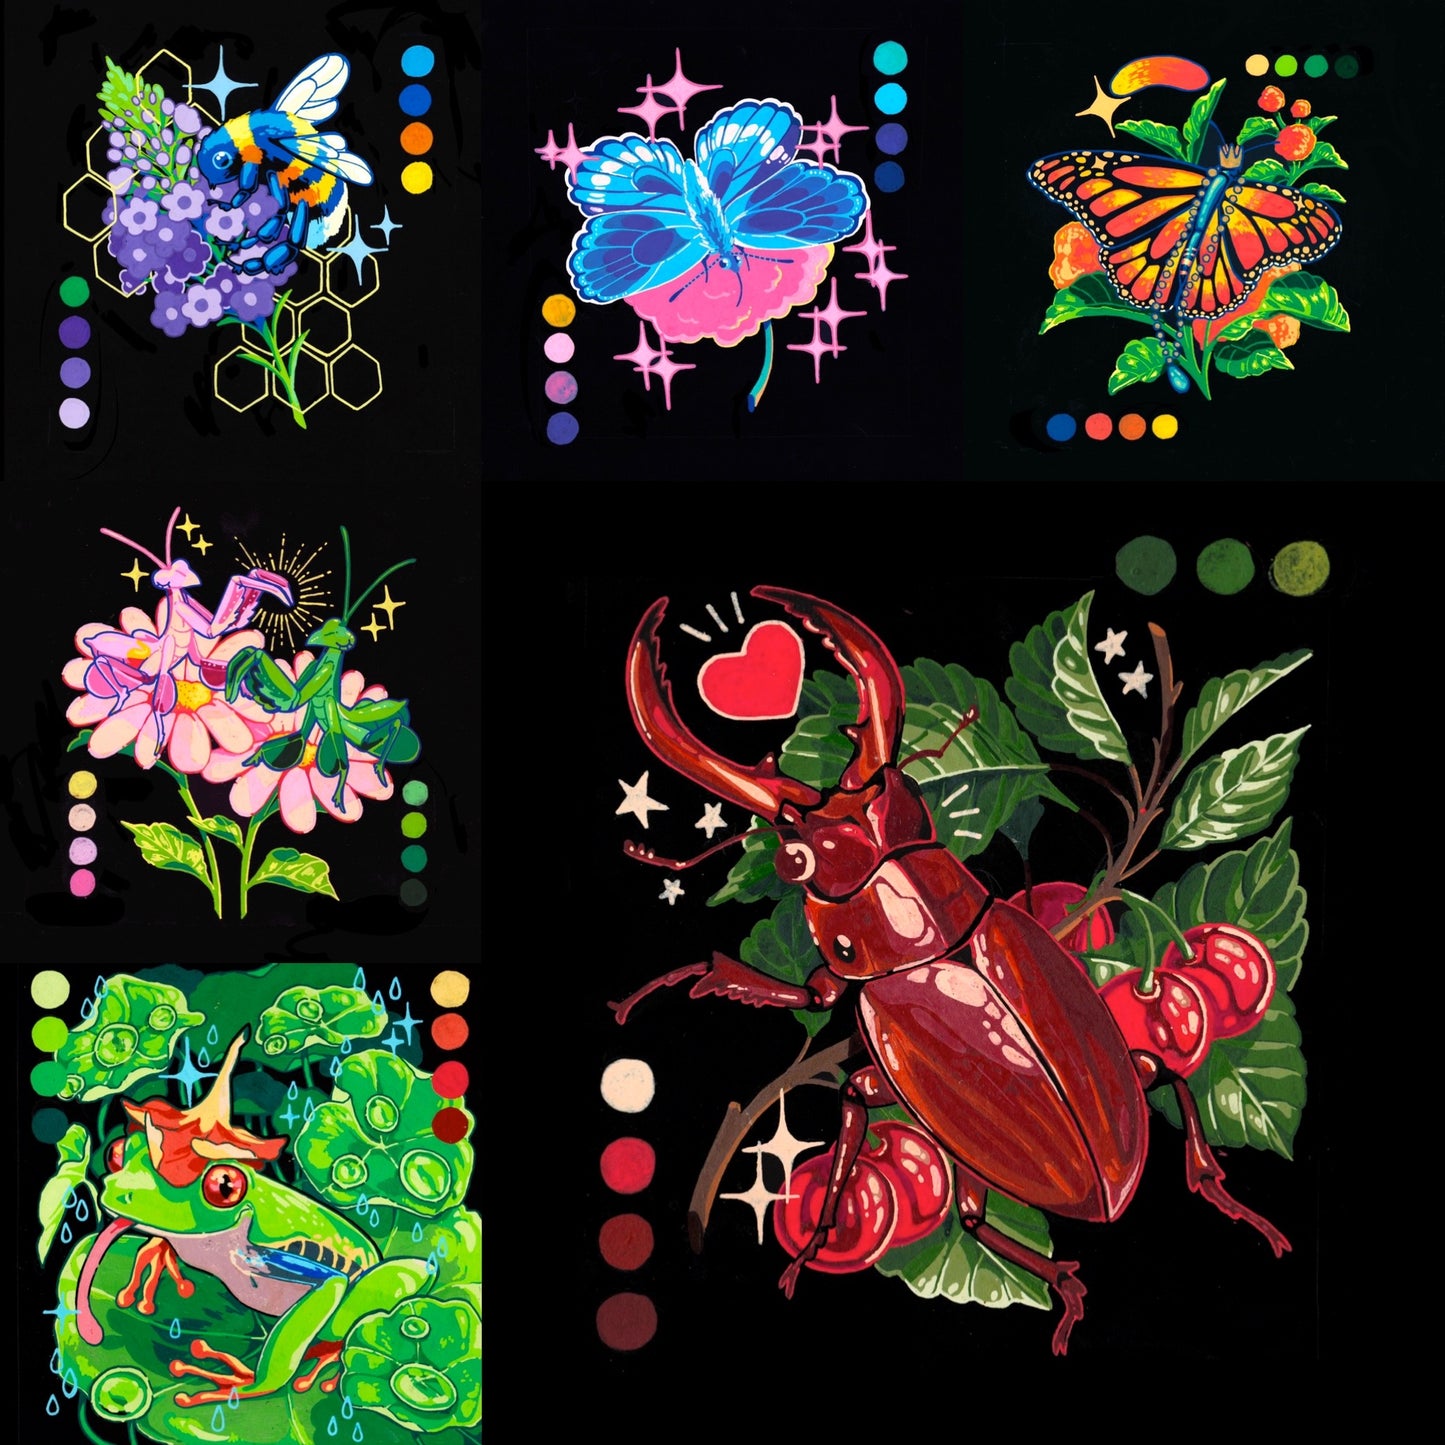 Insect posca Square Print collection - Art print 1 or 6